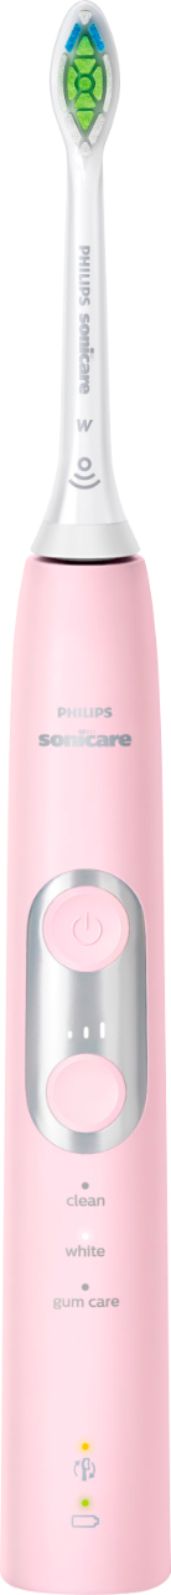 Angle View: Philips Sonicare - ProtectiveClean 6100 Rechargeable Toothbrush - Pastel Pink